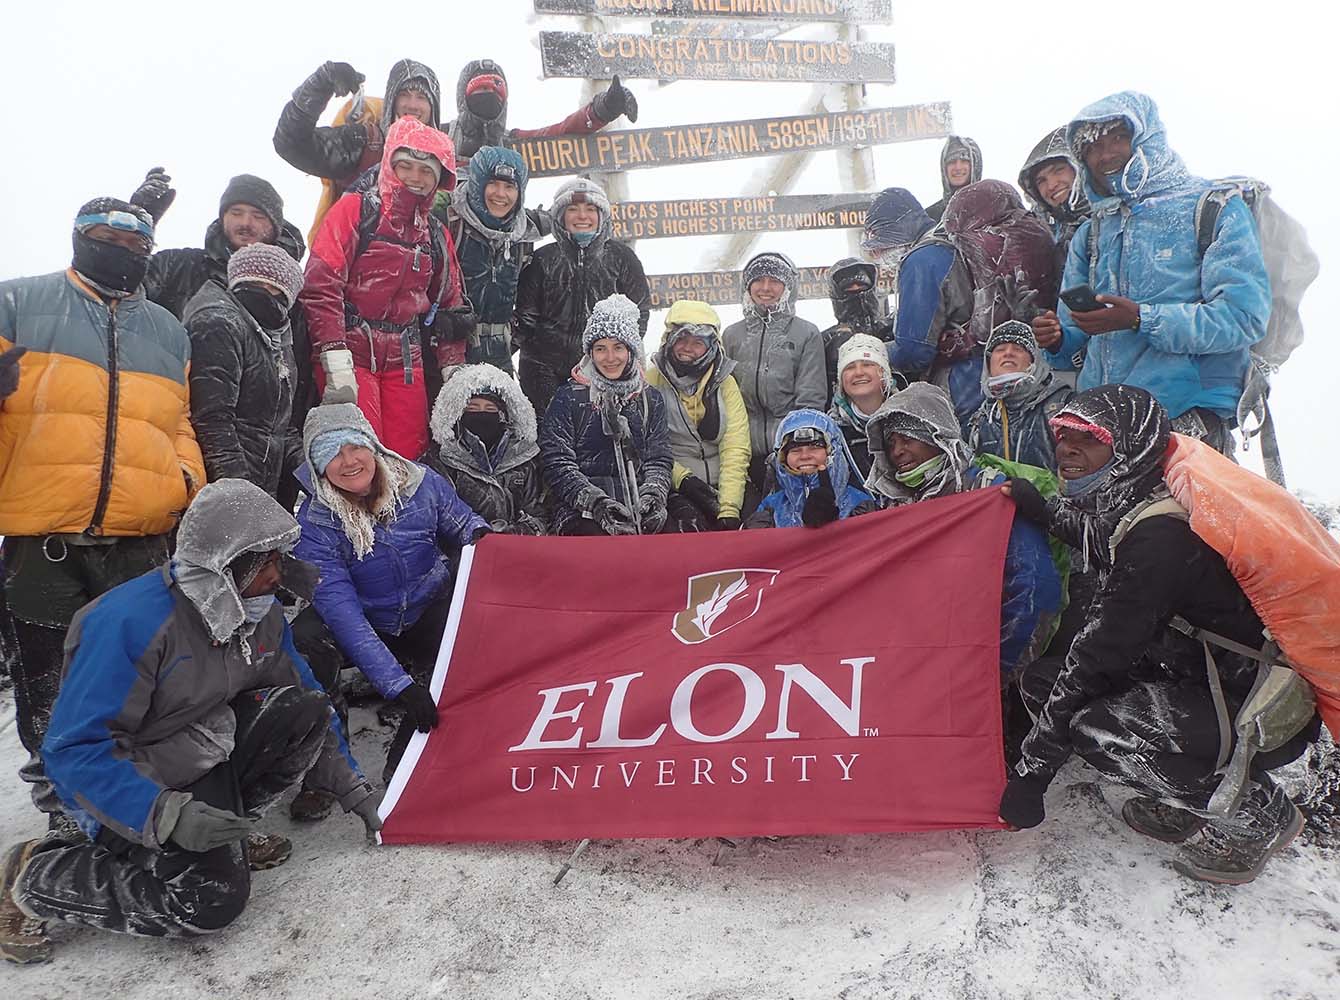 Students participate in one of ϲ's best study abroad programs in Tanzania. They stand at the top of Mount Kilimanjaro holding an ϲ banner, bundled up and surrounded by snow.